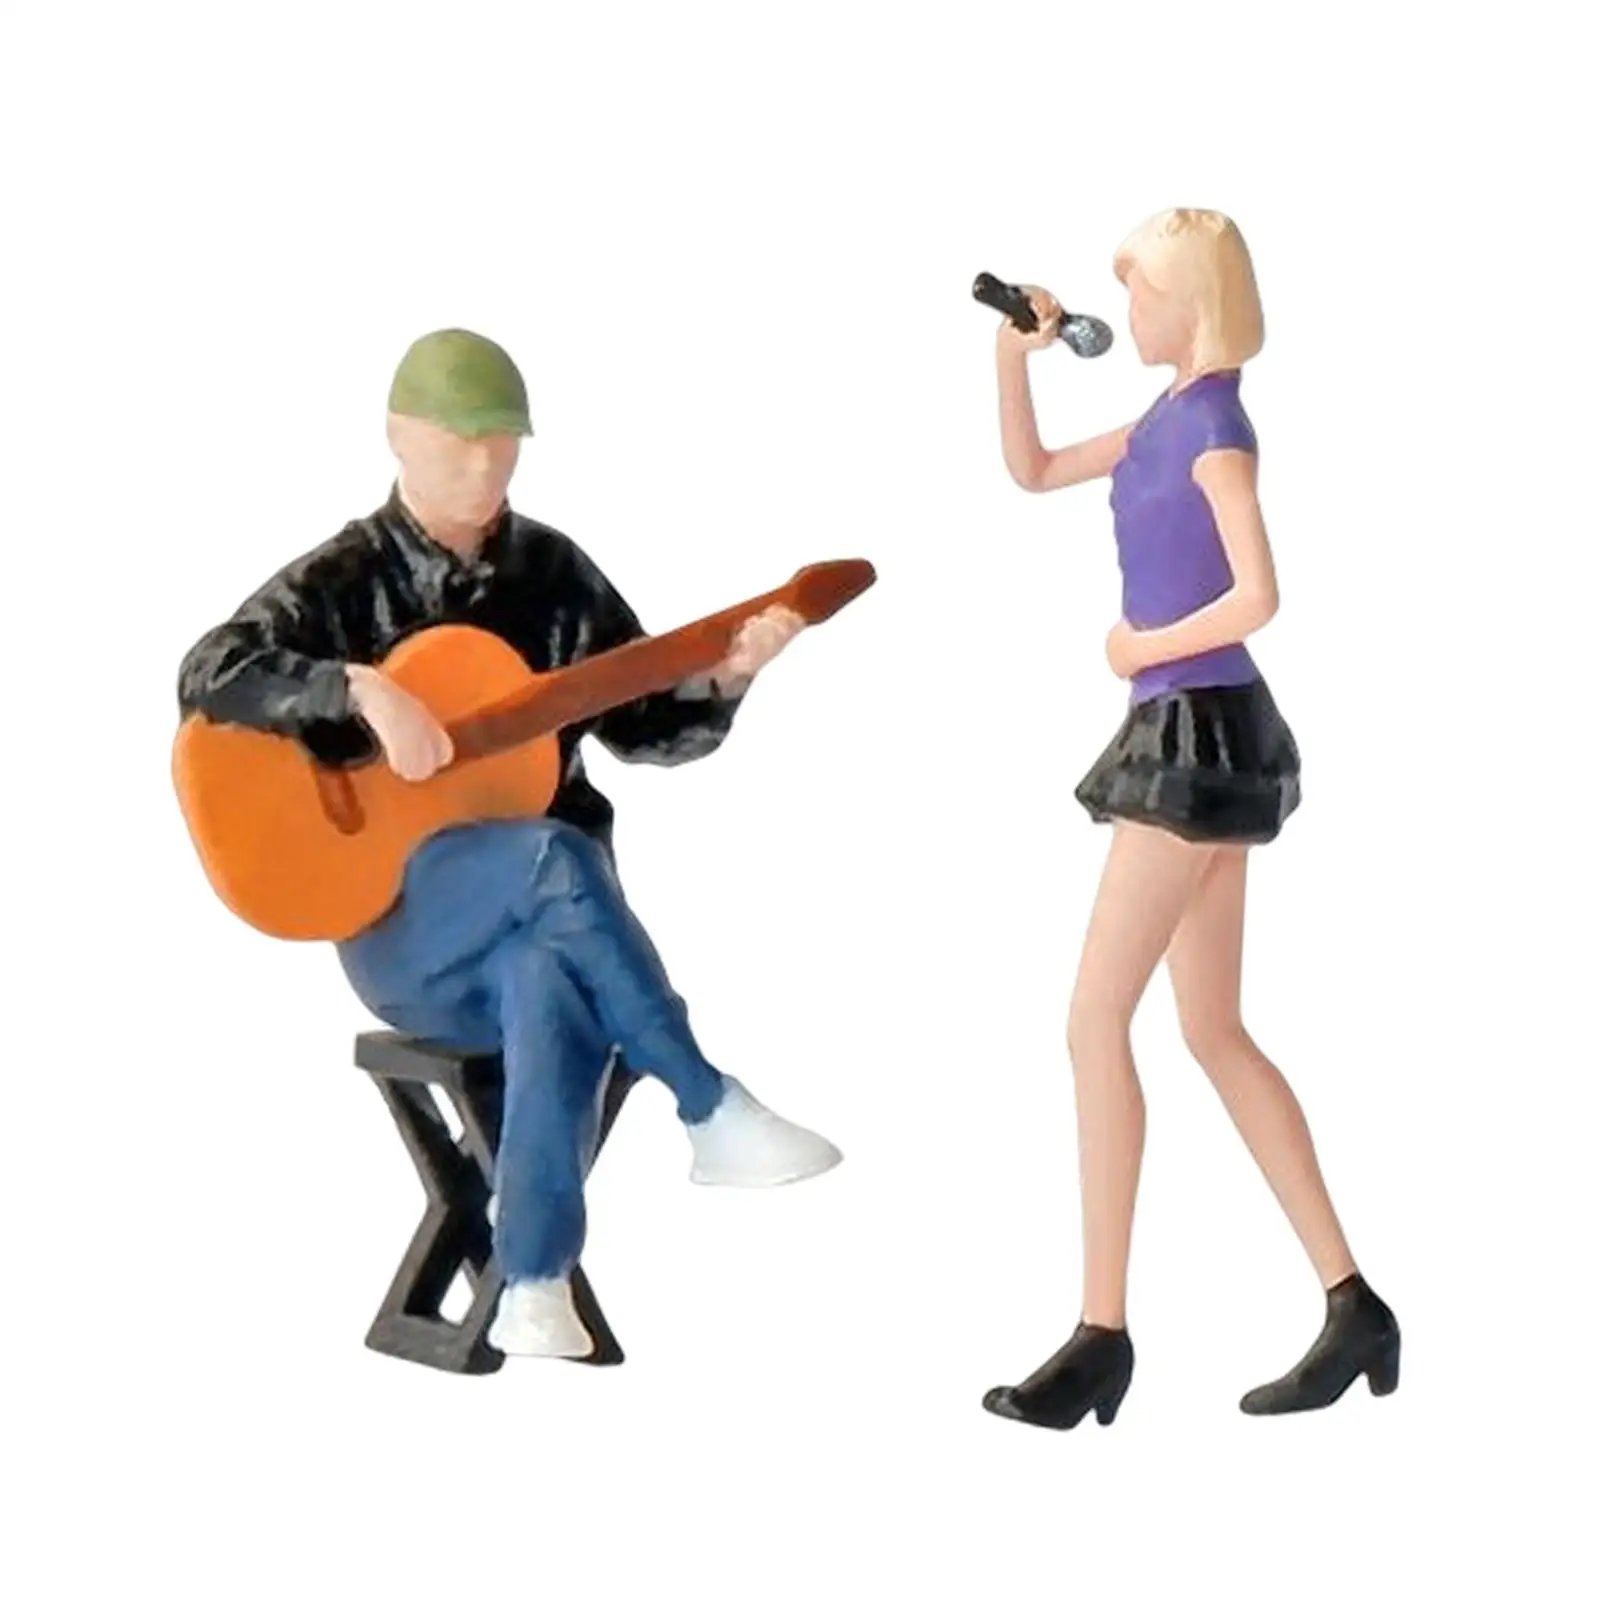 Guitarist and Singer Figures Model Trains People Figures Mini for Dollhouse